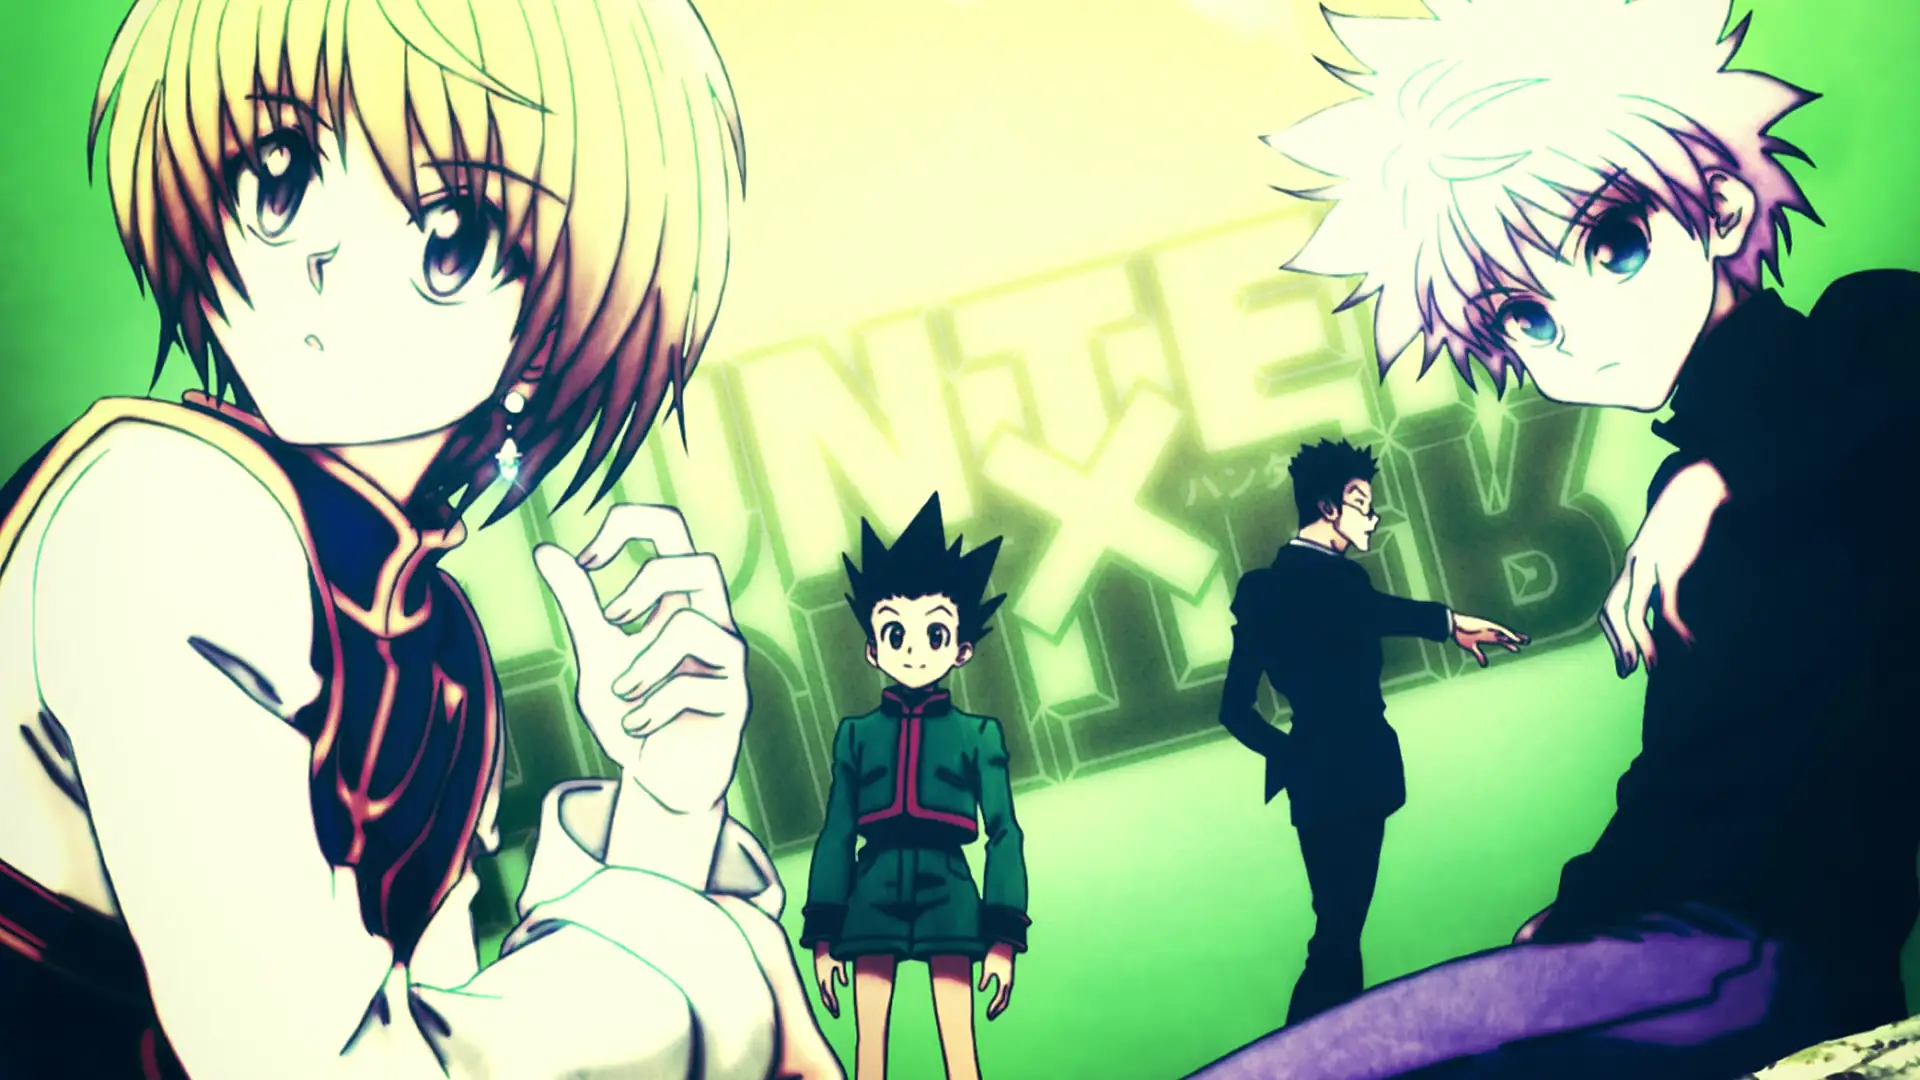 Hunter x Hunter Fighting Game Announced by Bushiroad Games & Eighting